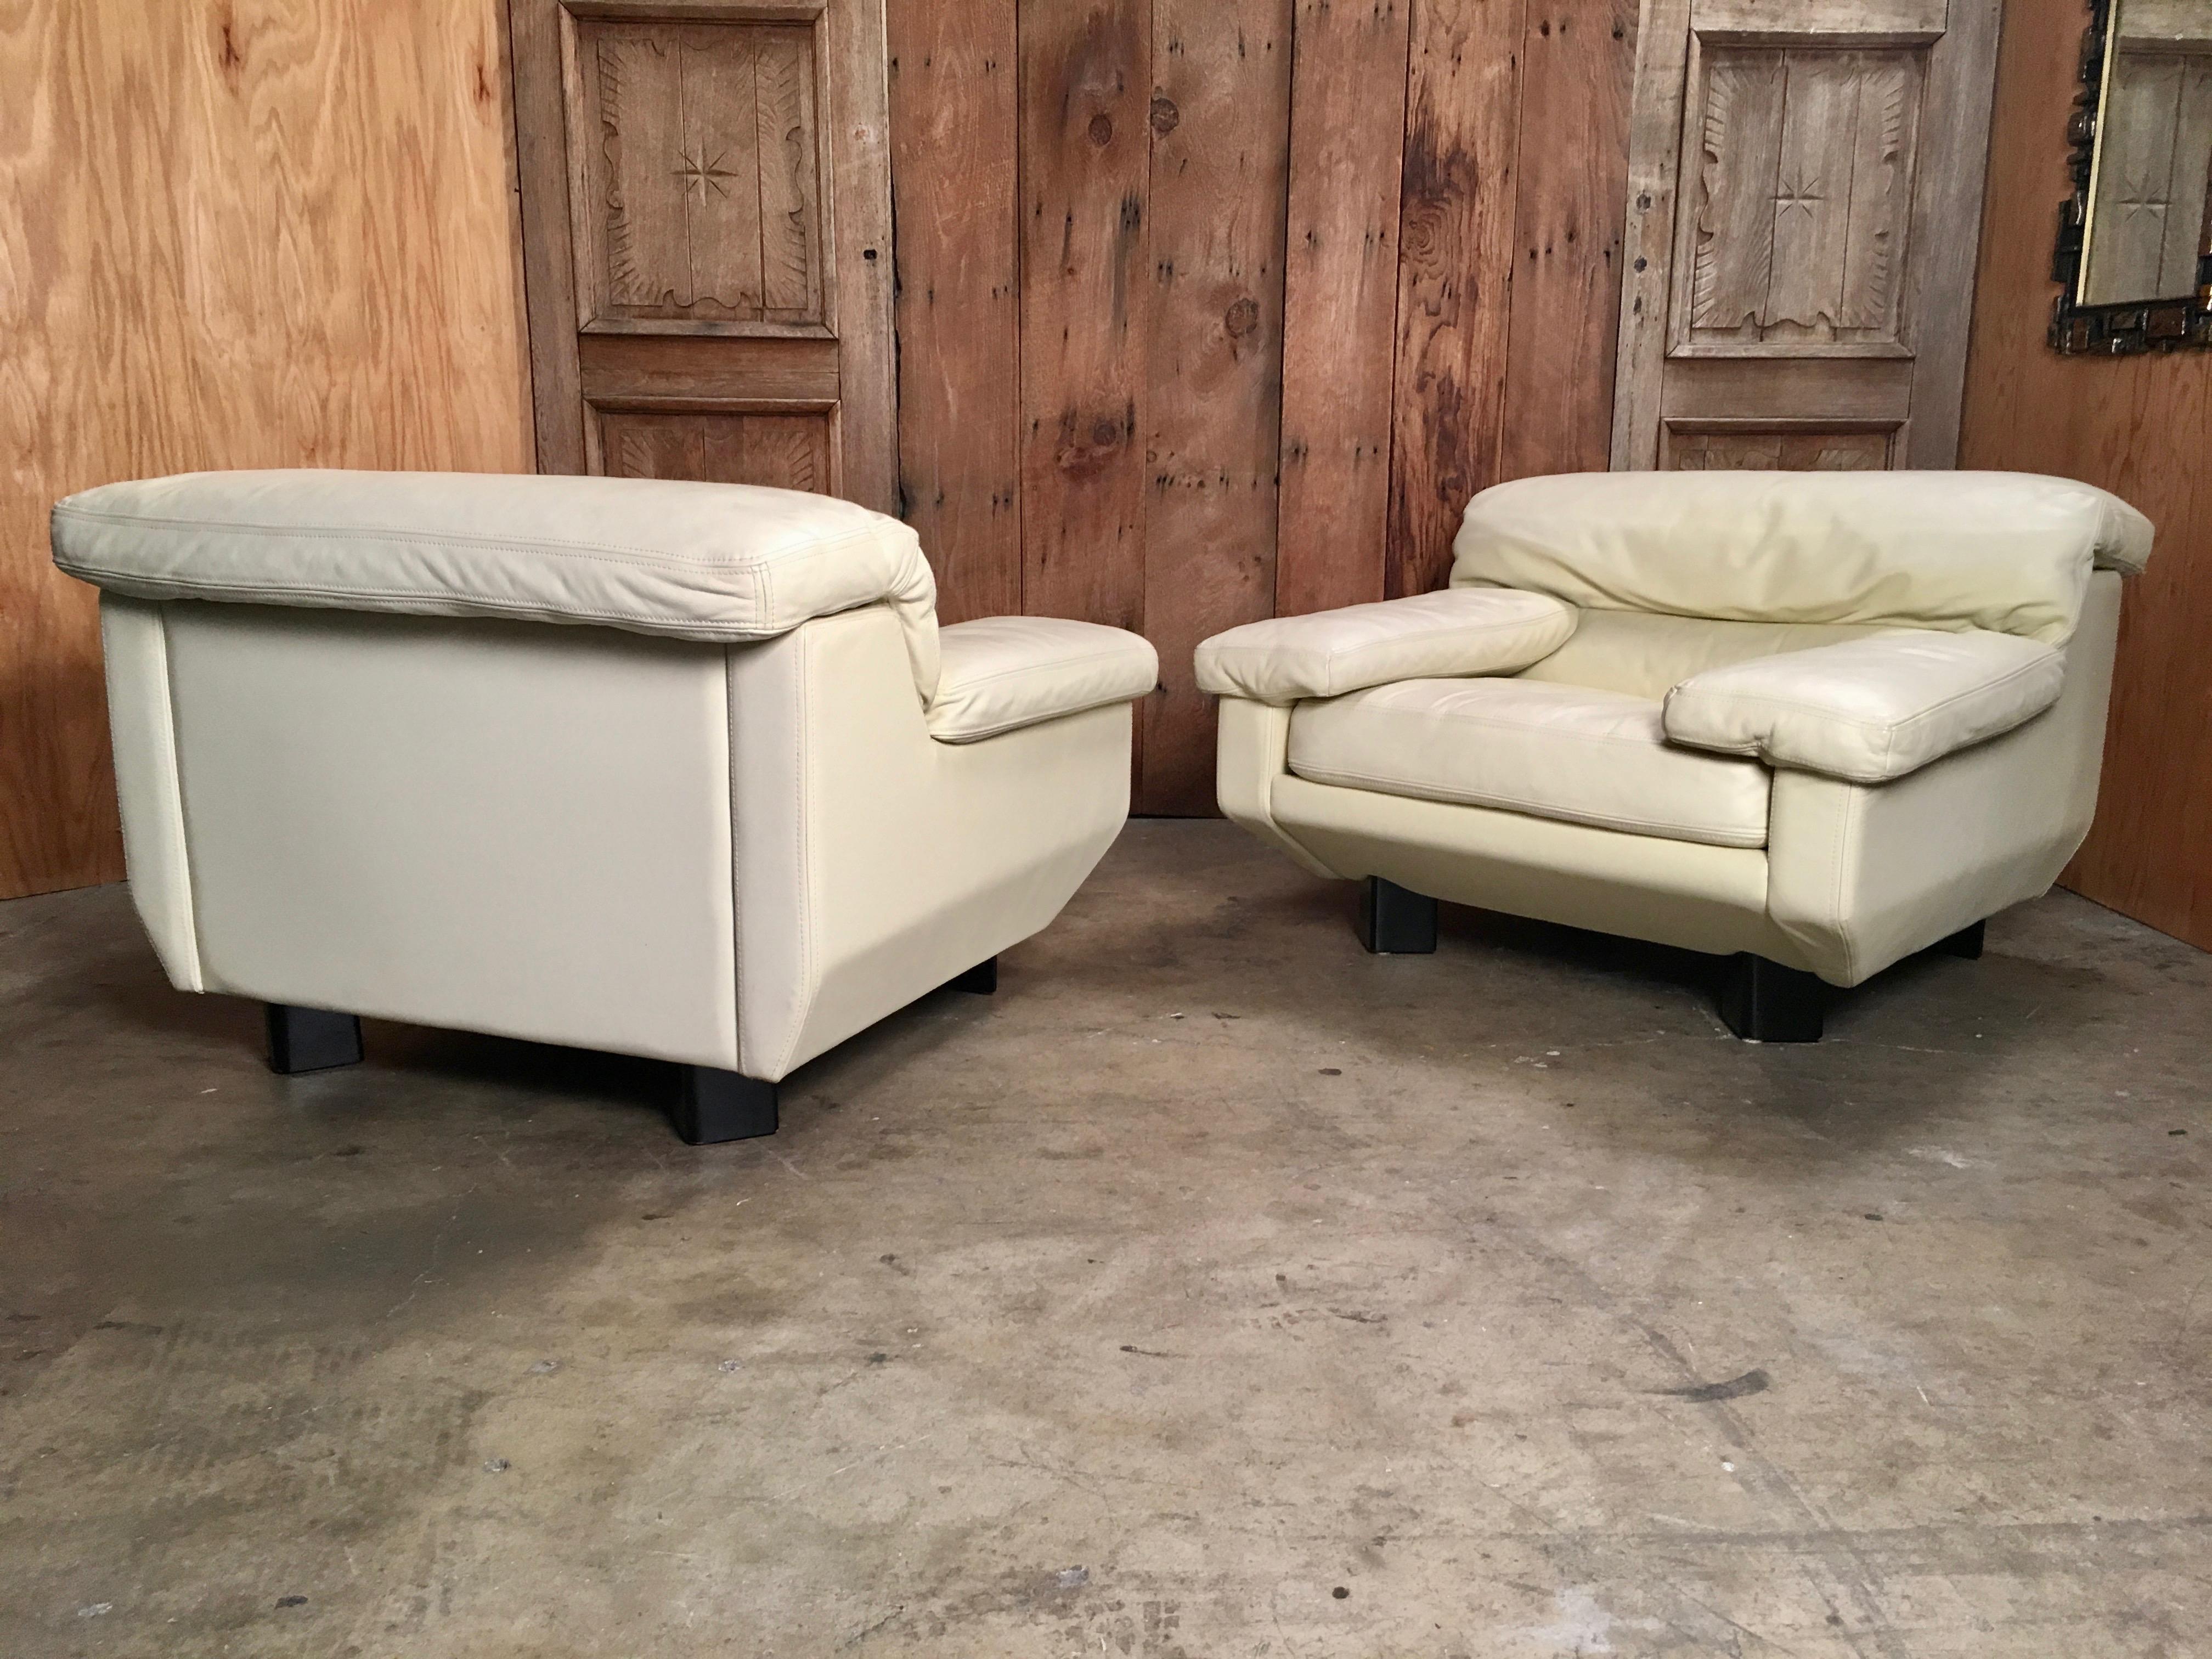 A pair of 1980s Italian leather lounge chairs with triangular feet and adjustable headrest in a off white leather from the 